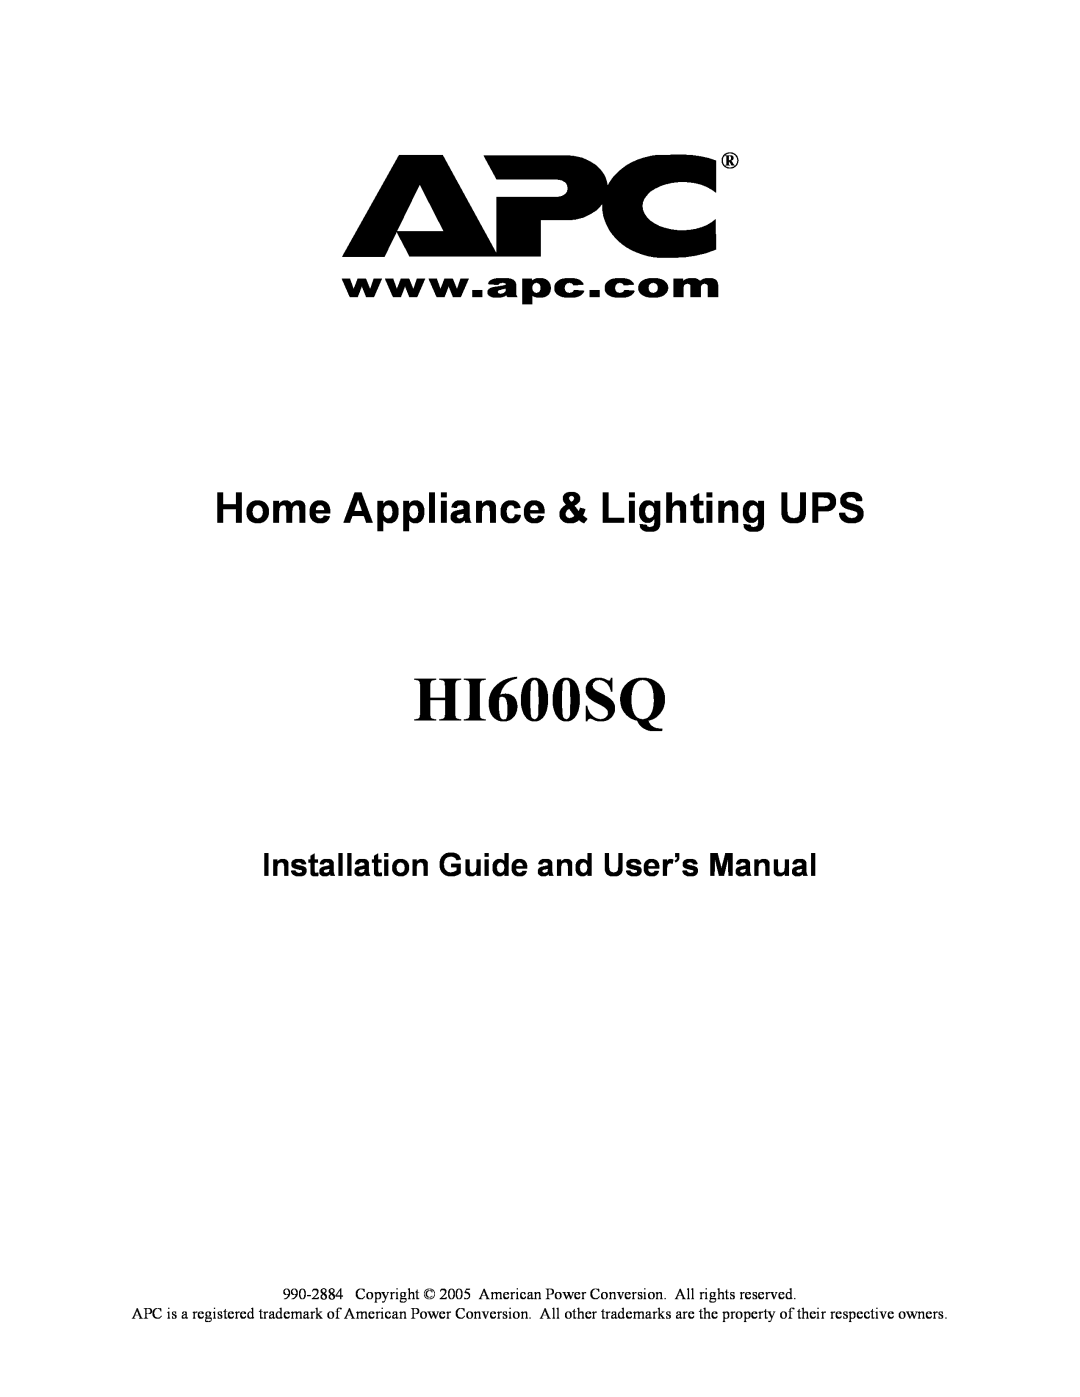 American Power Conversion HI600SQ user manual Home Appliance & Lighting UPS, Installation Guide and User’s Manual 